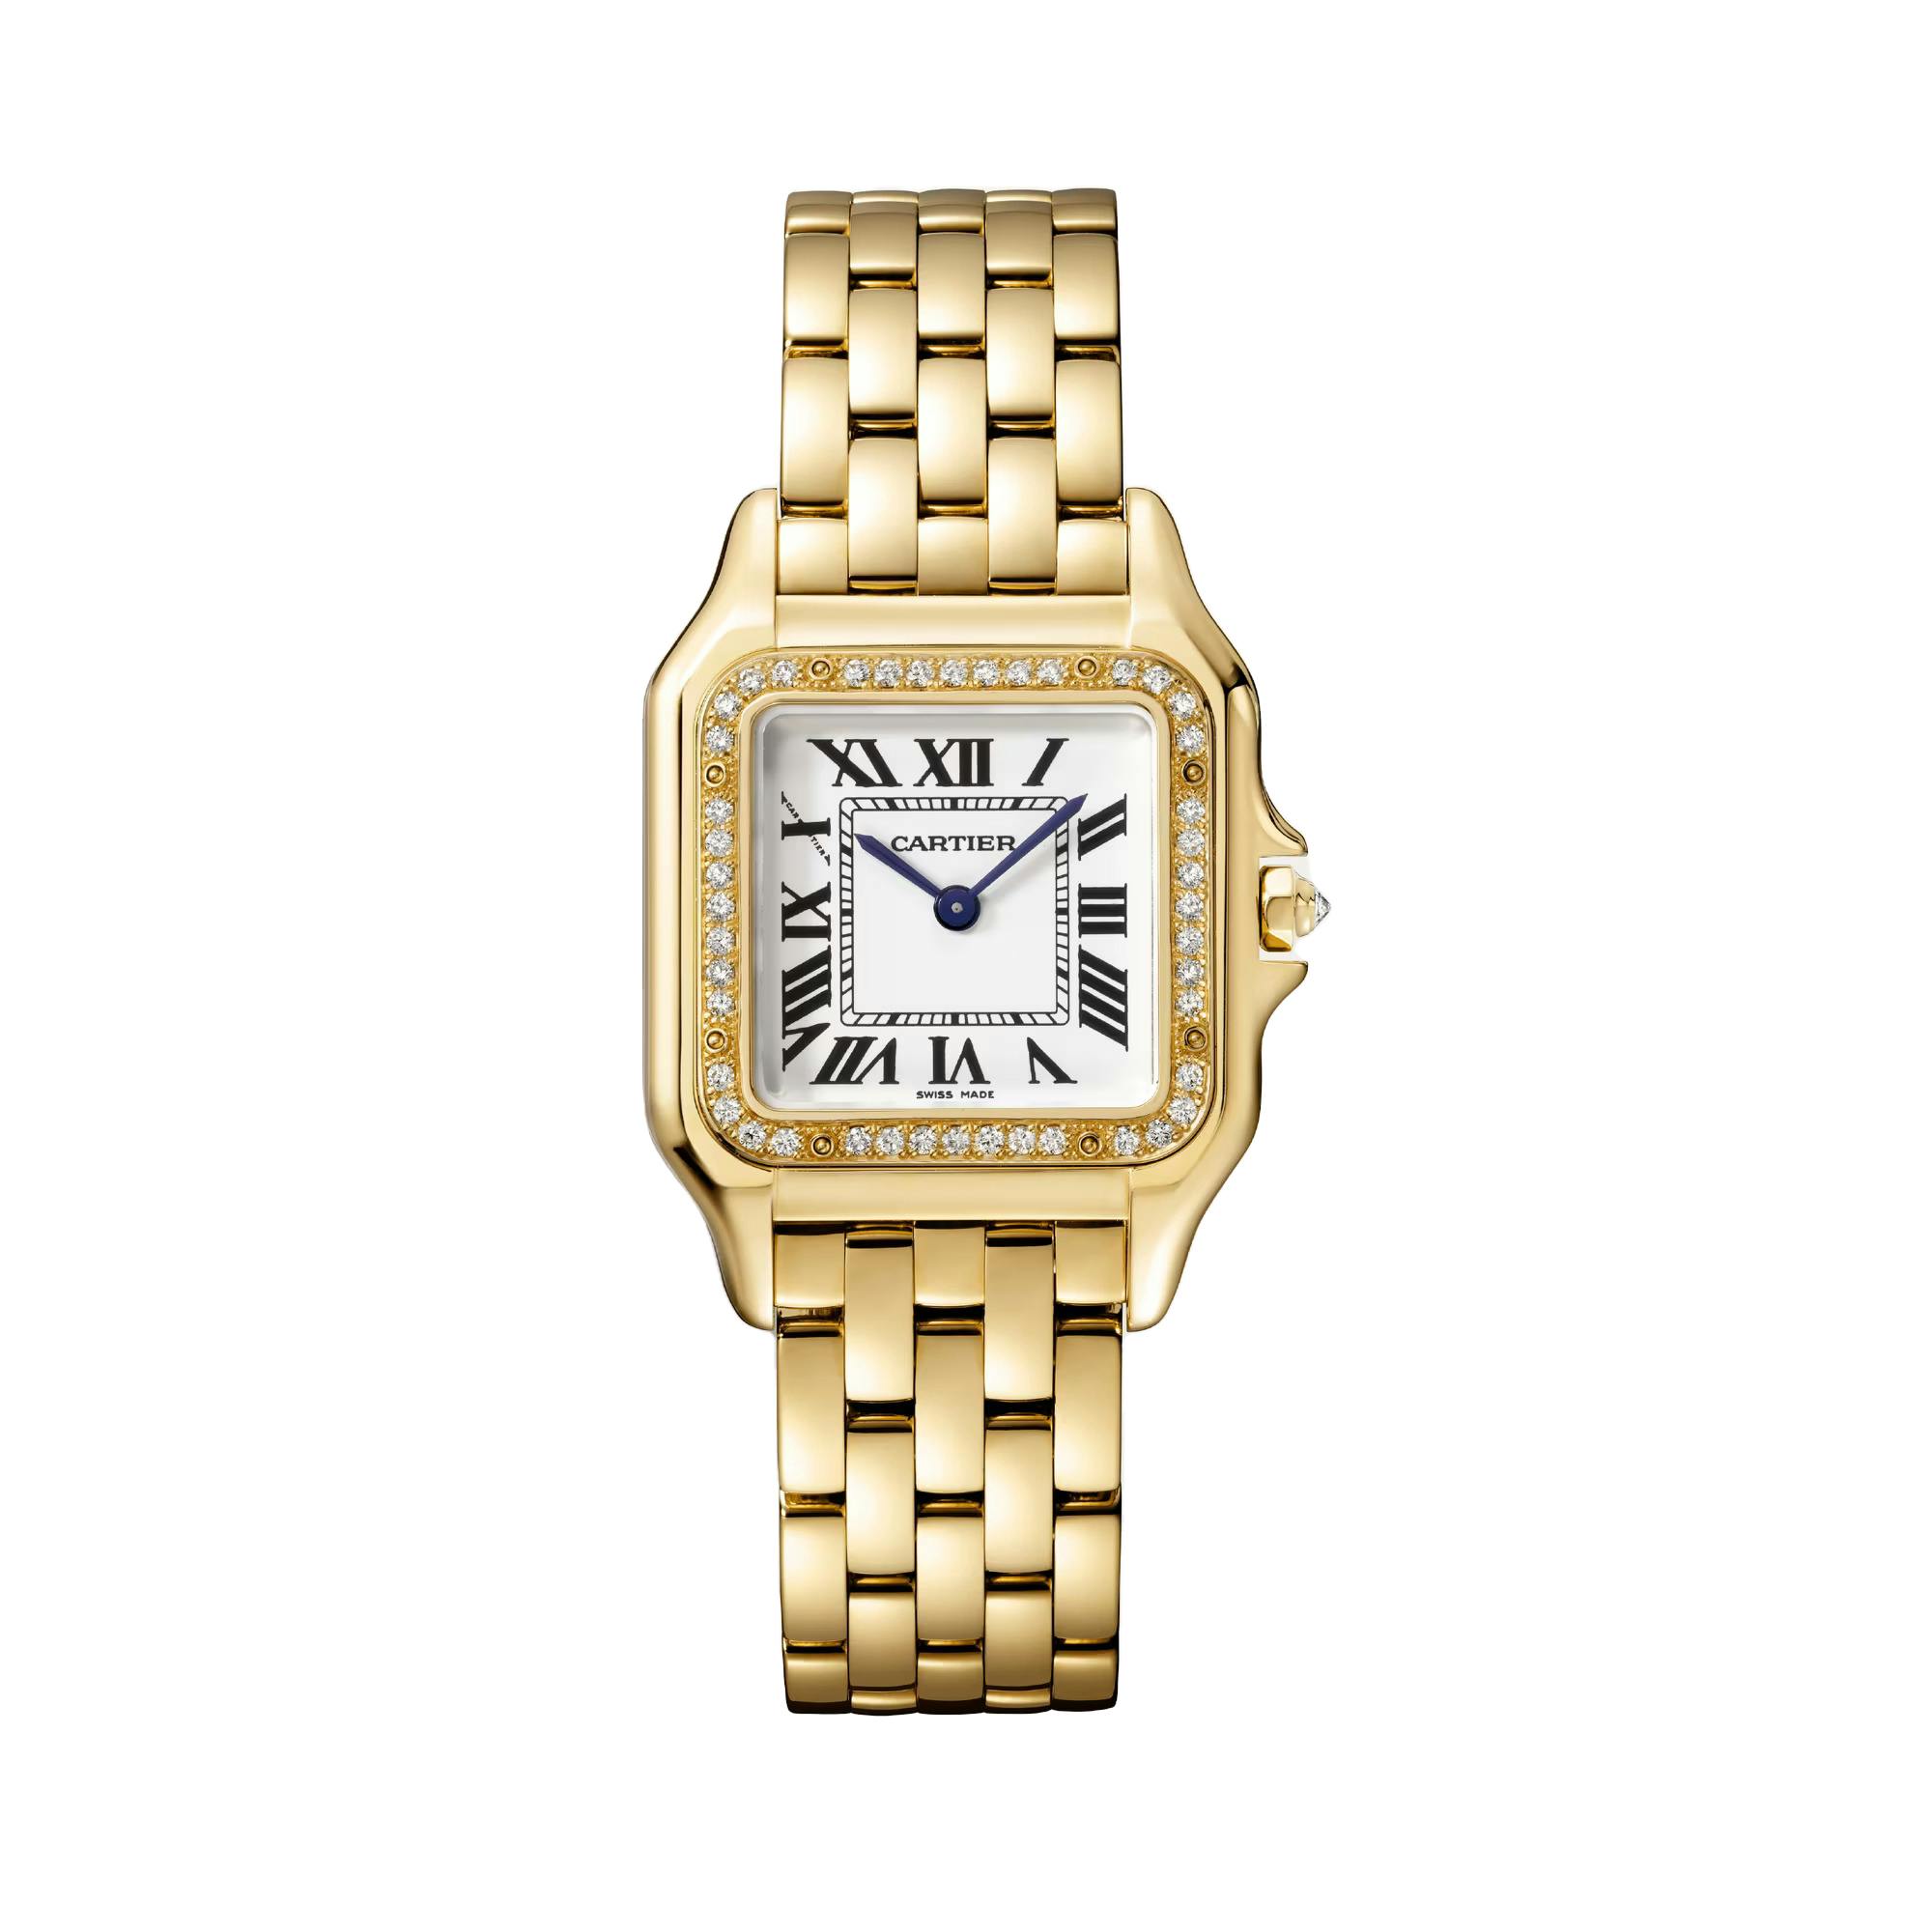 Panthere de Cartier Watch in Yellow Gold with Diamonds, medium model 0